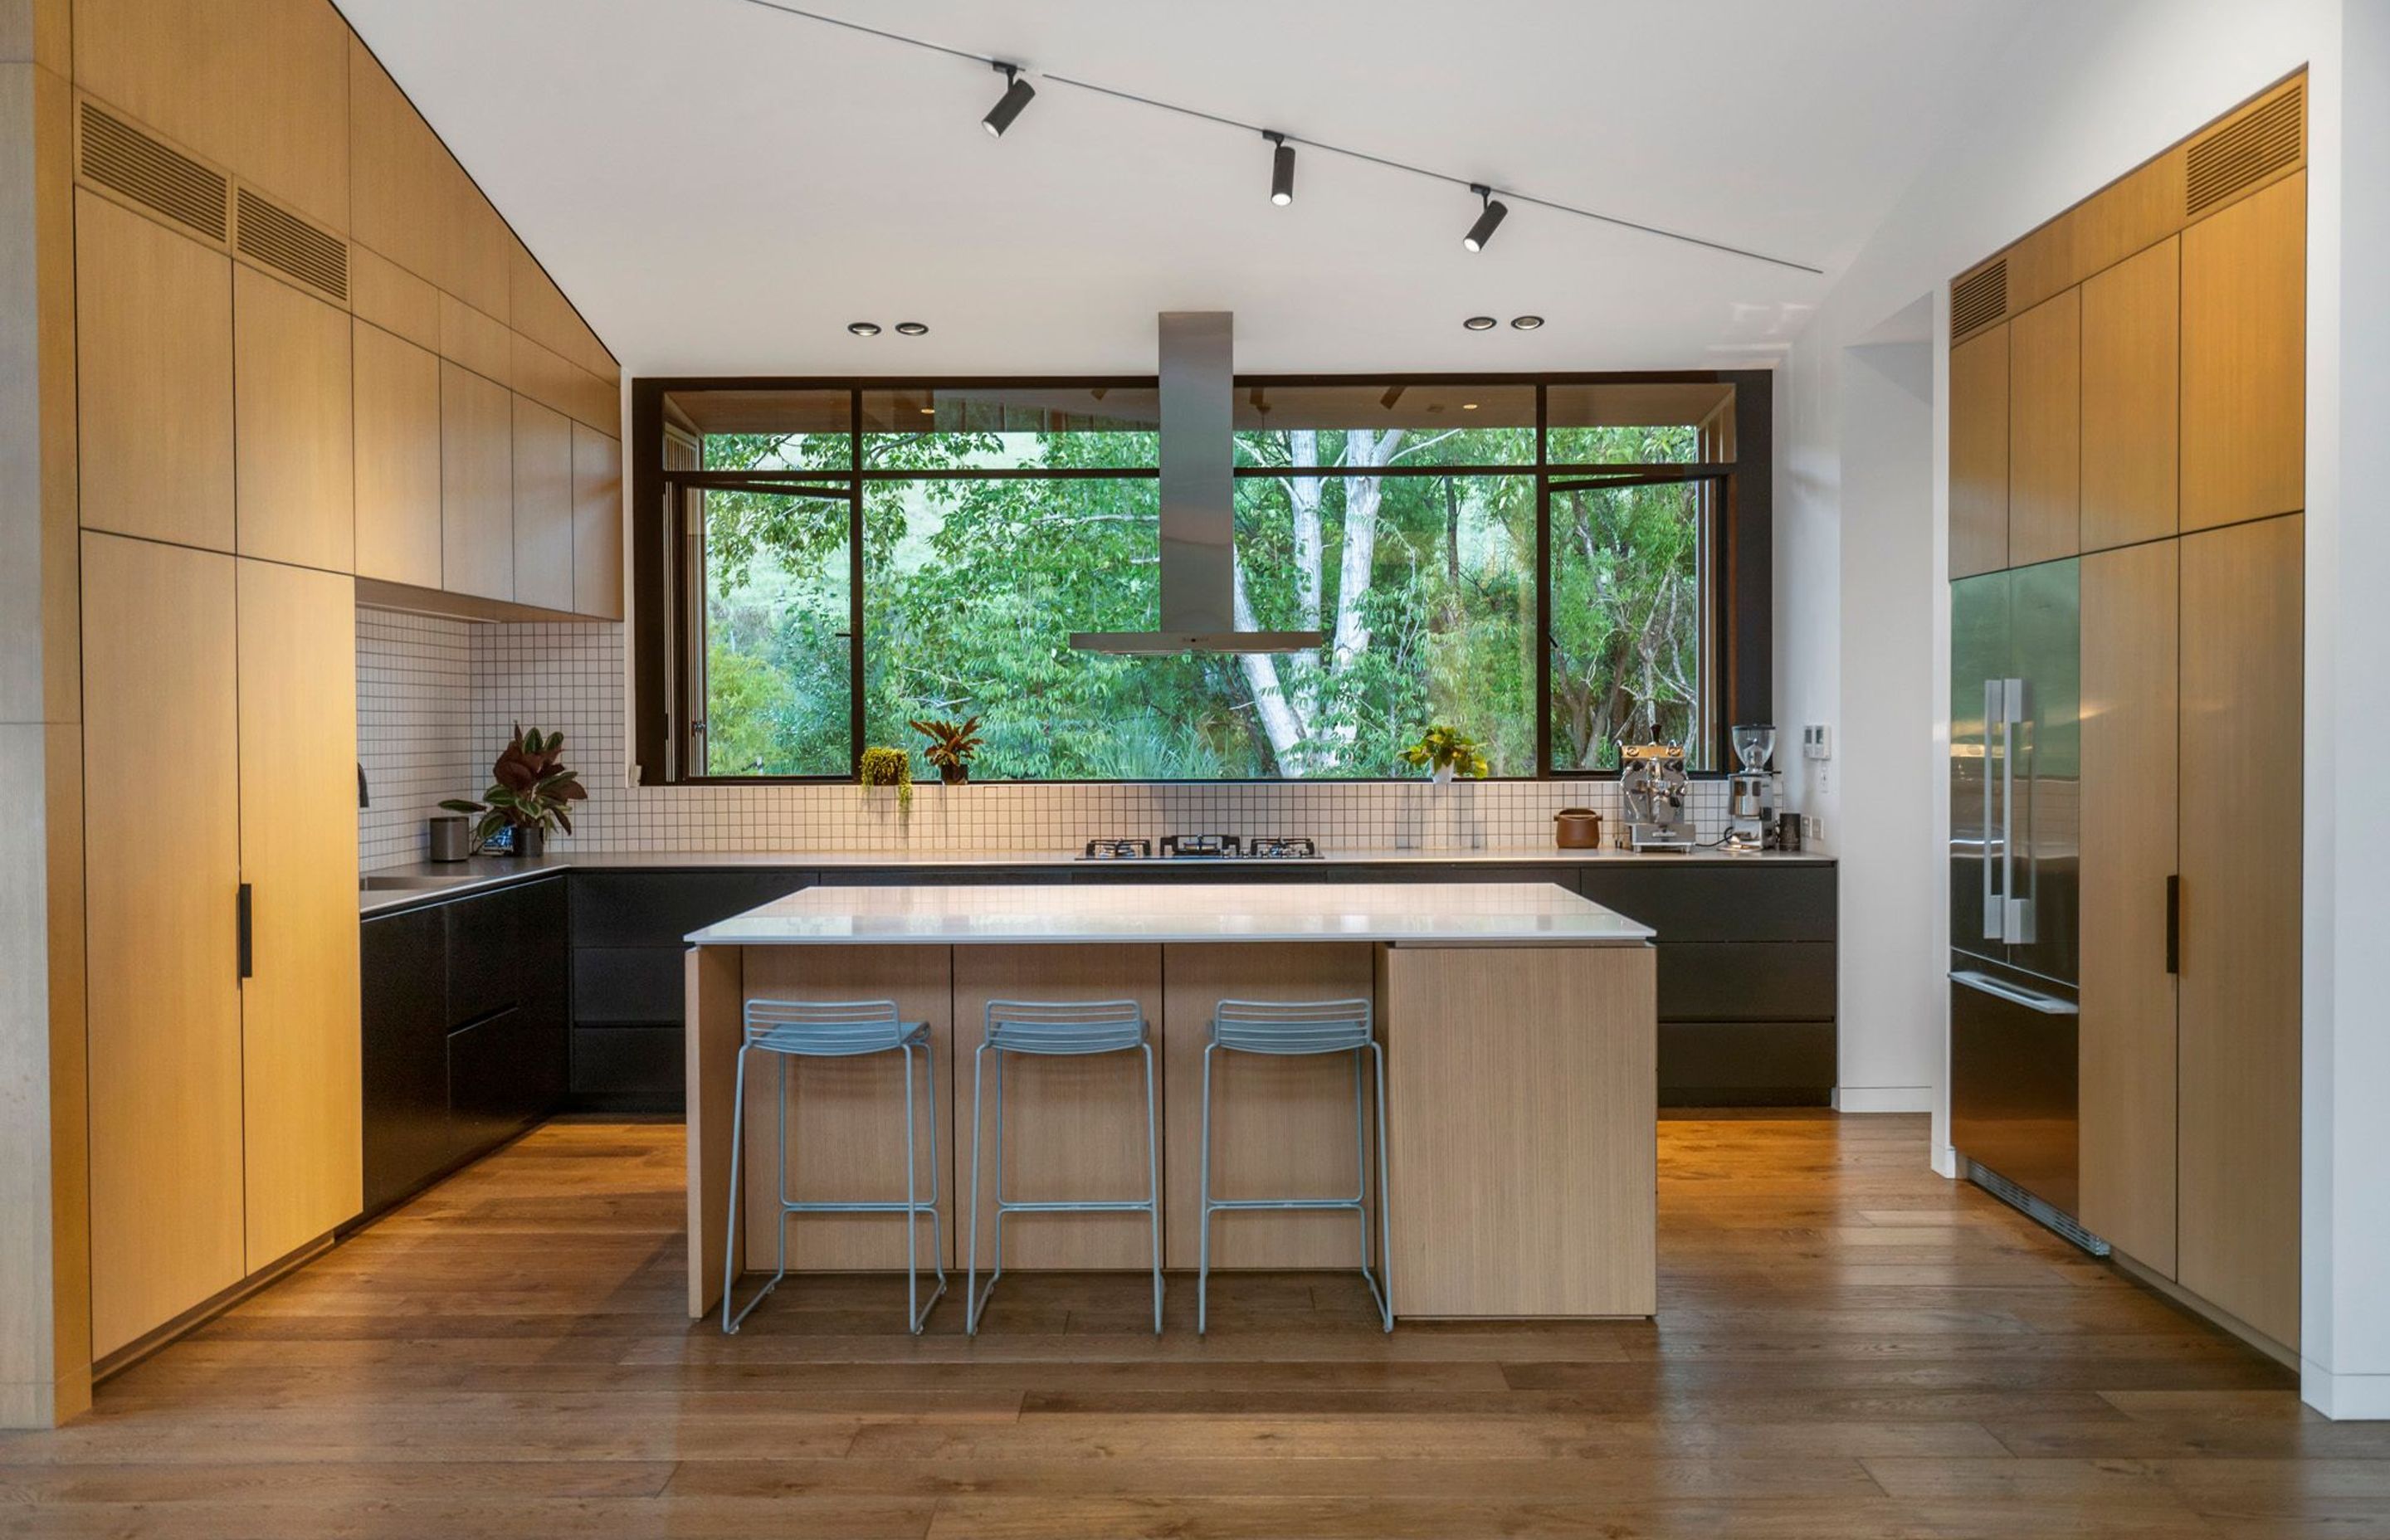 The kitchen is a chef's dream, with a stunning framed view of the trees, plenty of workspace and easy-to-clean surfaces.